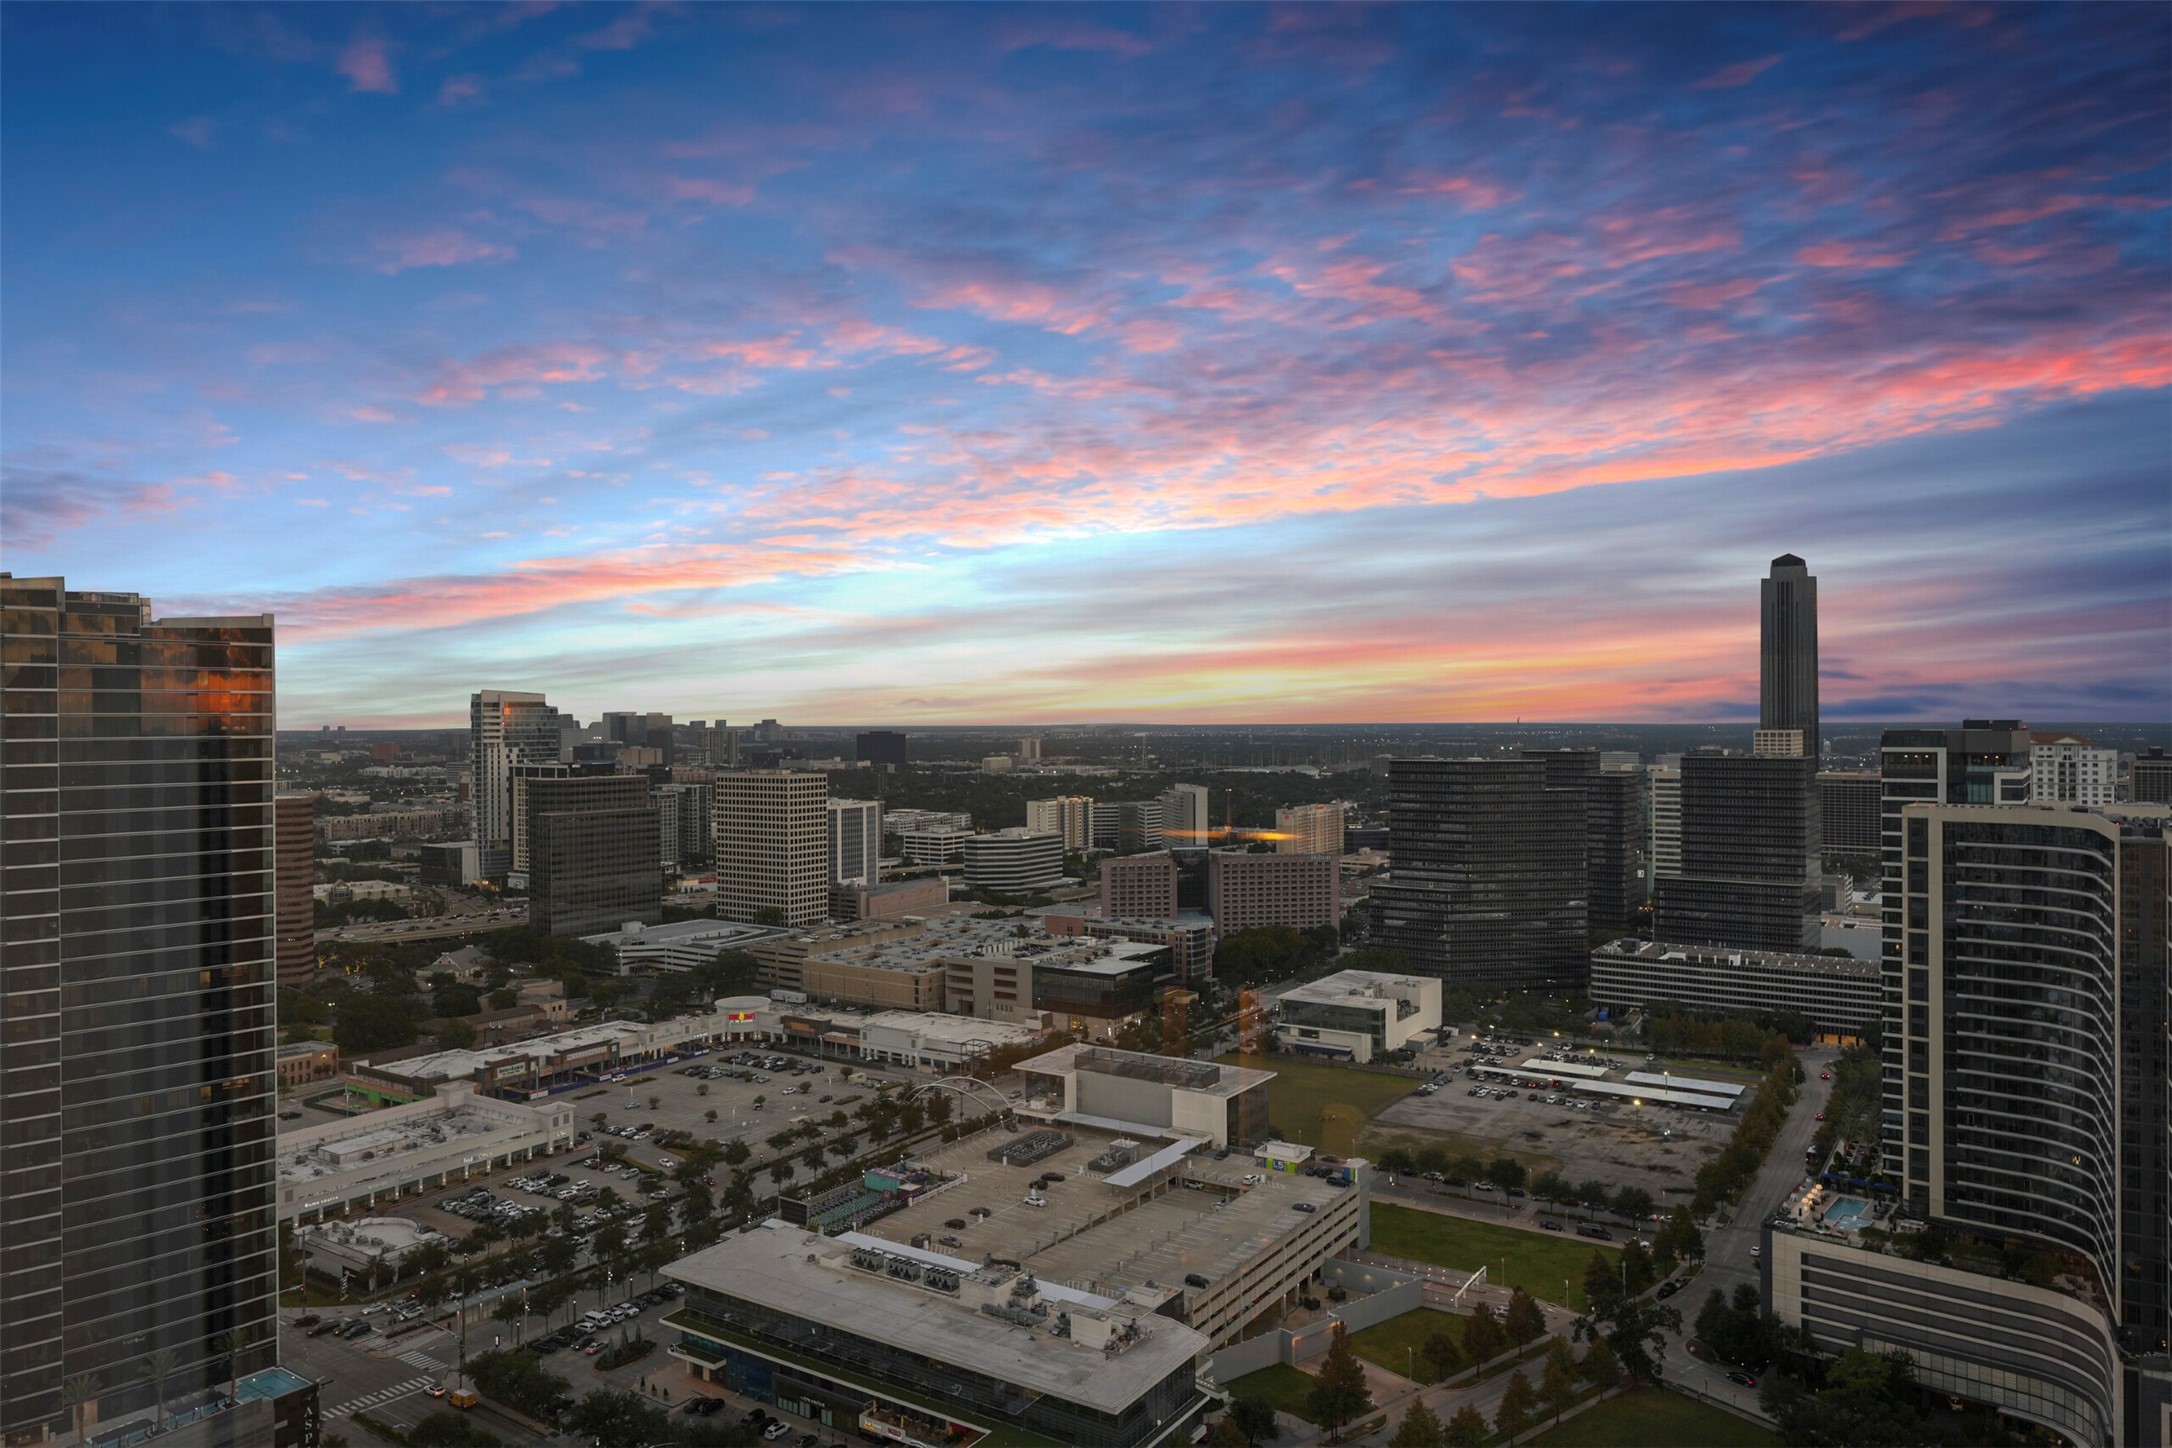 Enjoy beautiful sunset views from the 38th floor.